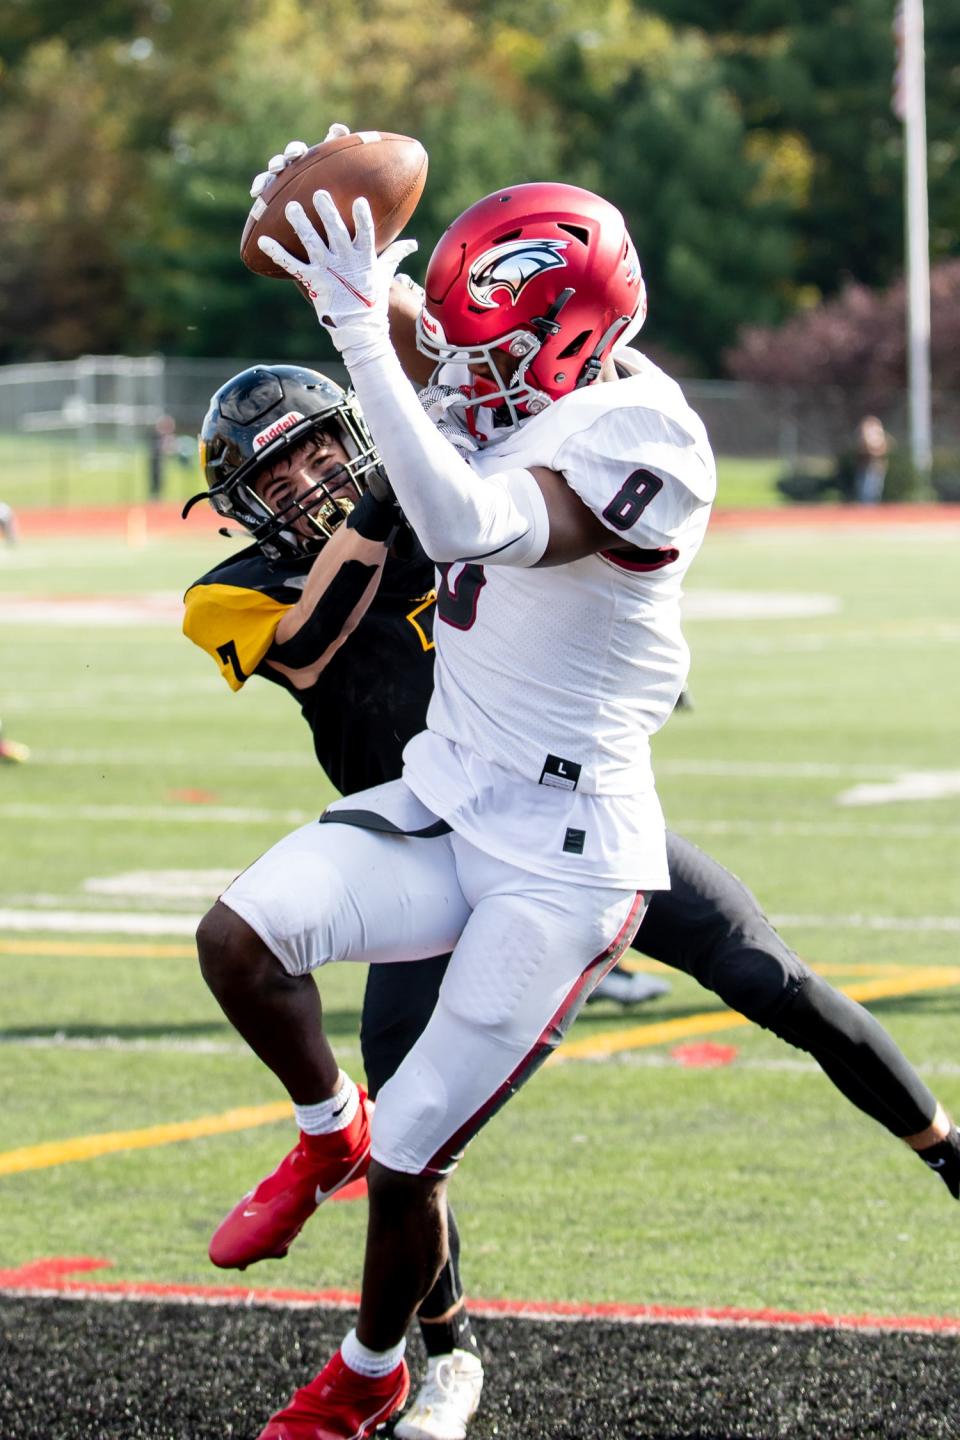 St. Joseph's Prep wide receiver Marvin Harrison, Jr. catches the ball in the end zone for a touchdown while Archbishop Wood defensive back Andrew McHugh defends on Saturday, October 31, 2020.  Prep won, 52-6.